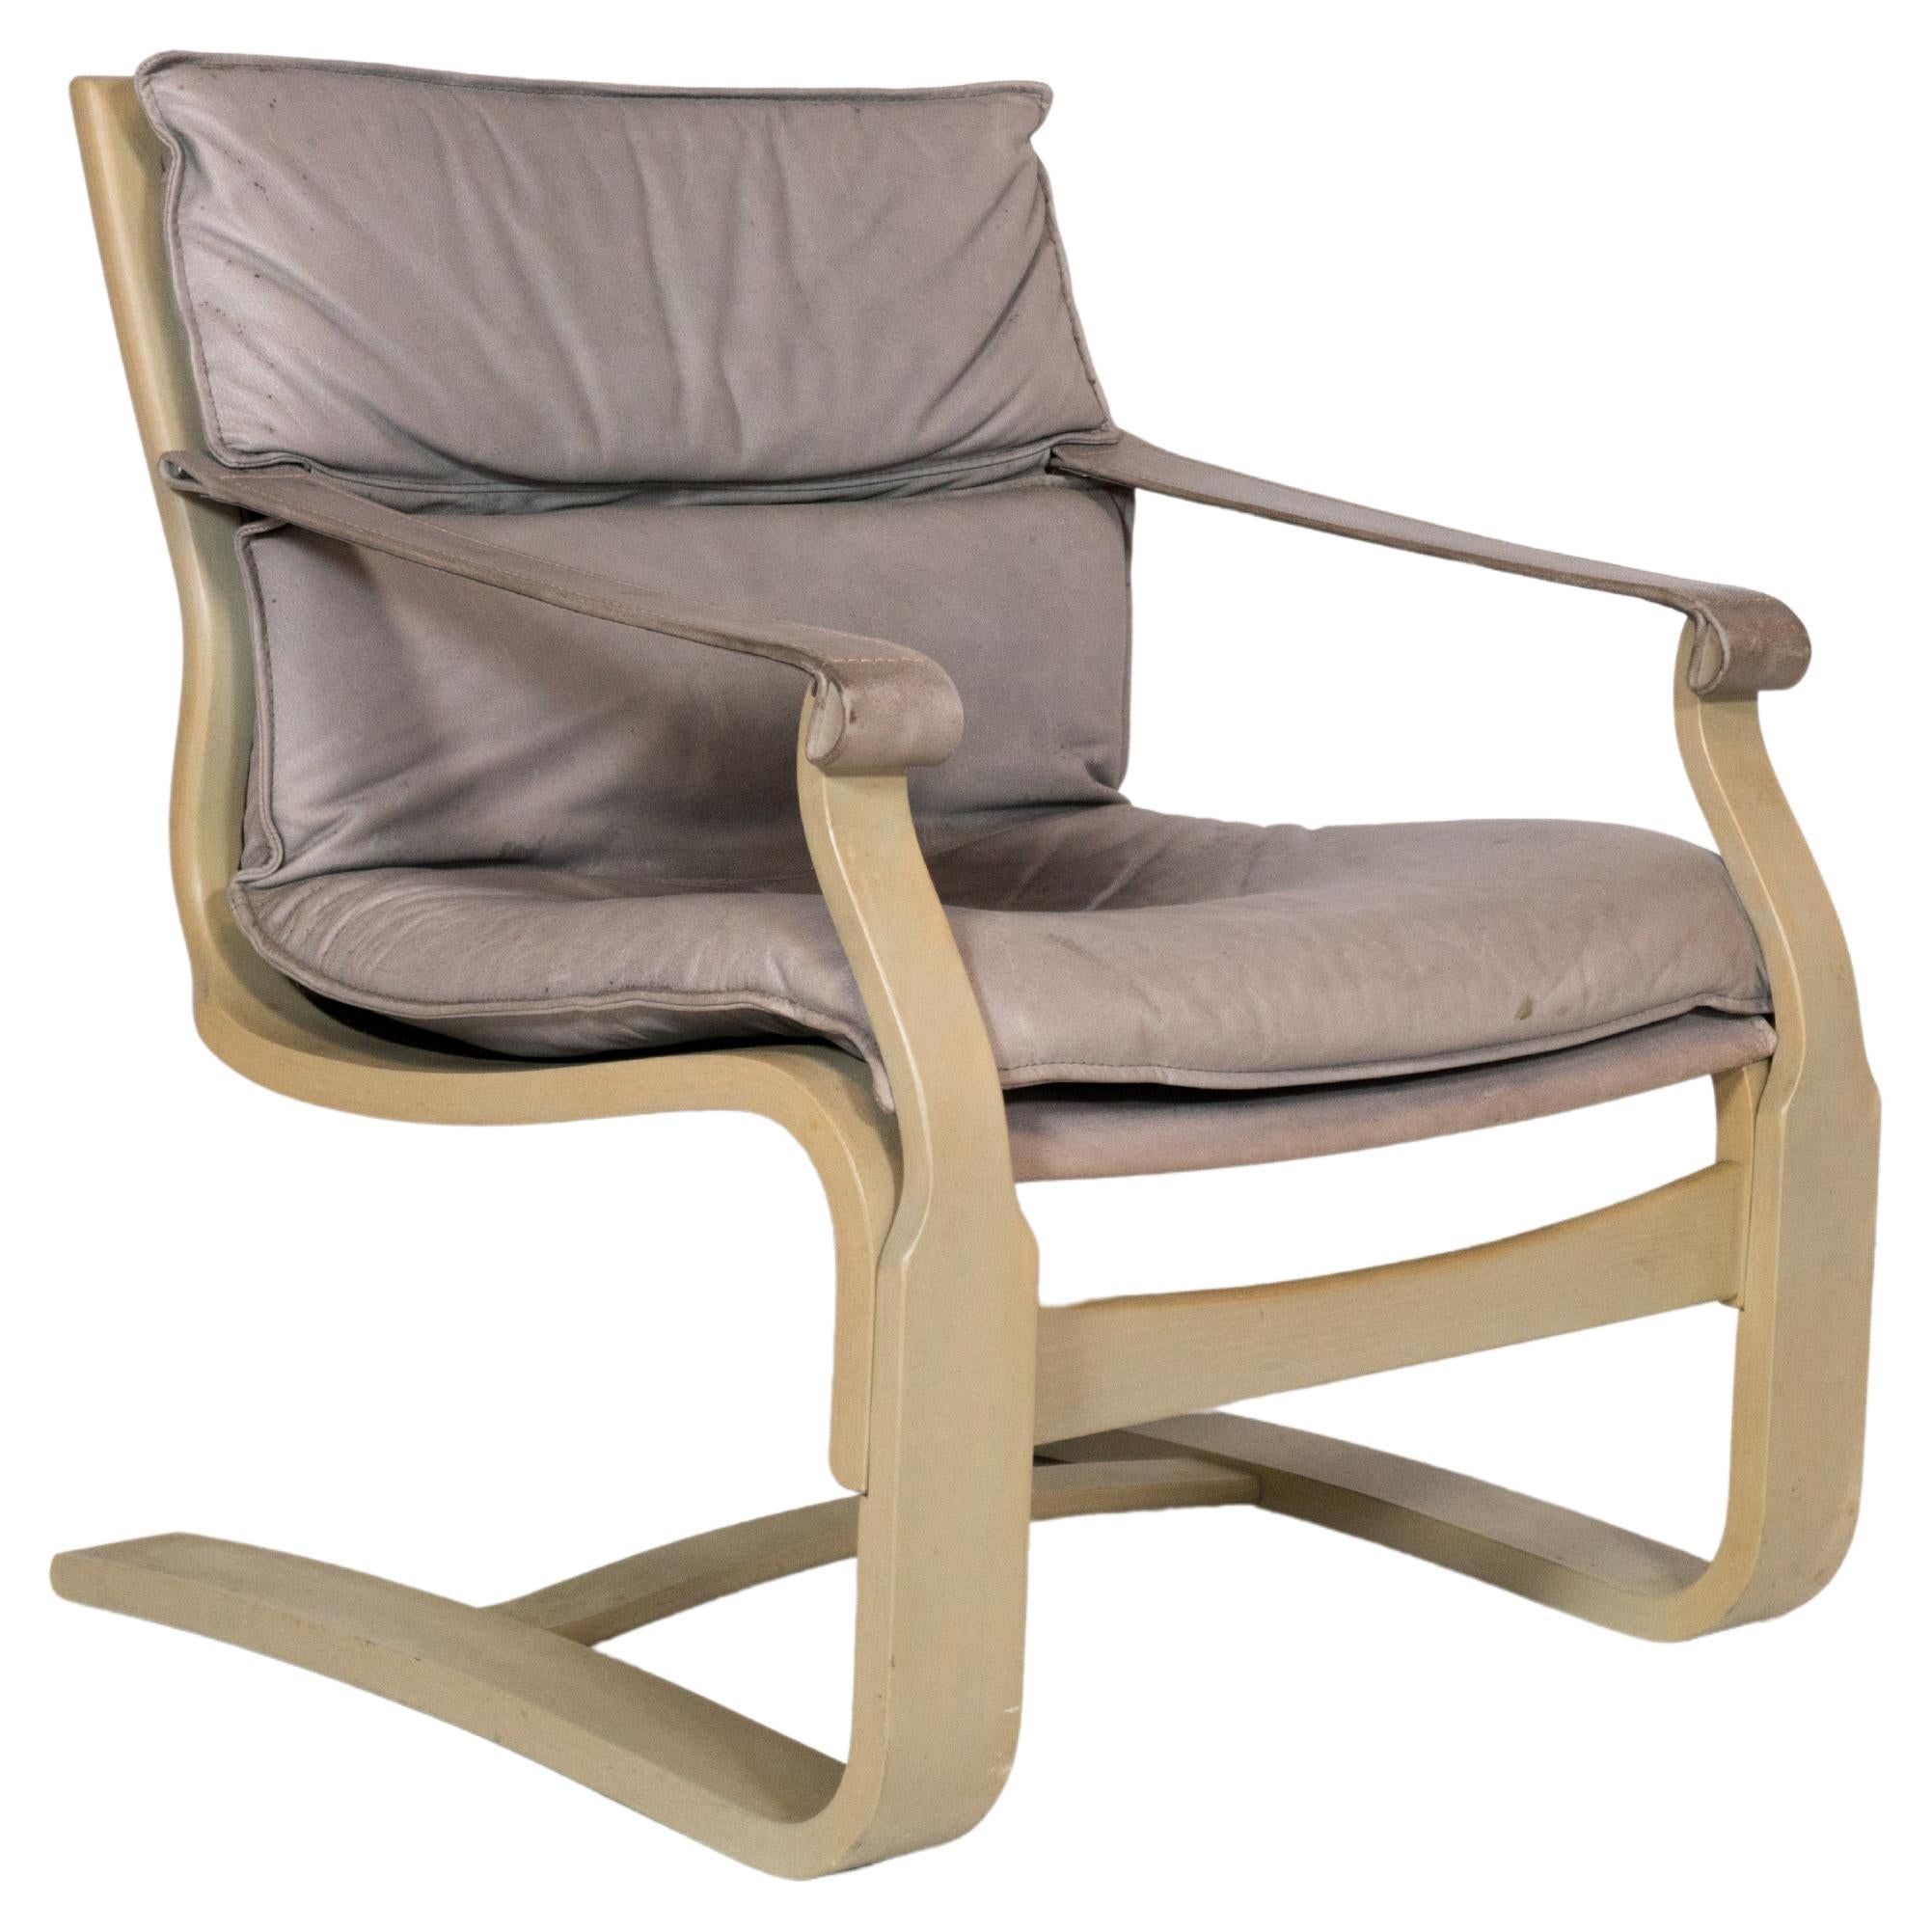 1970s Ake Fribytter Bentwood and Leather Lounge Chair for Nelo For Sale